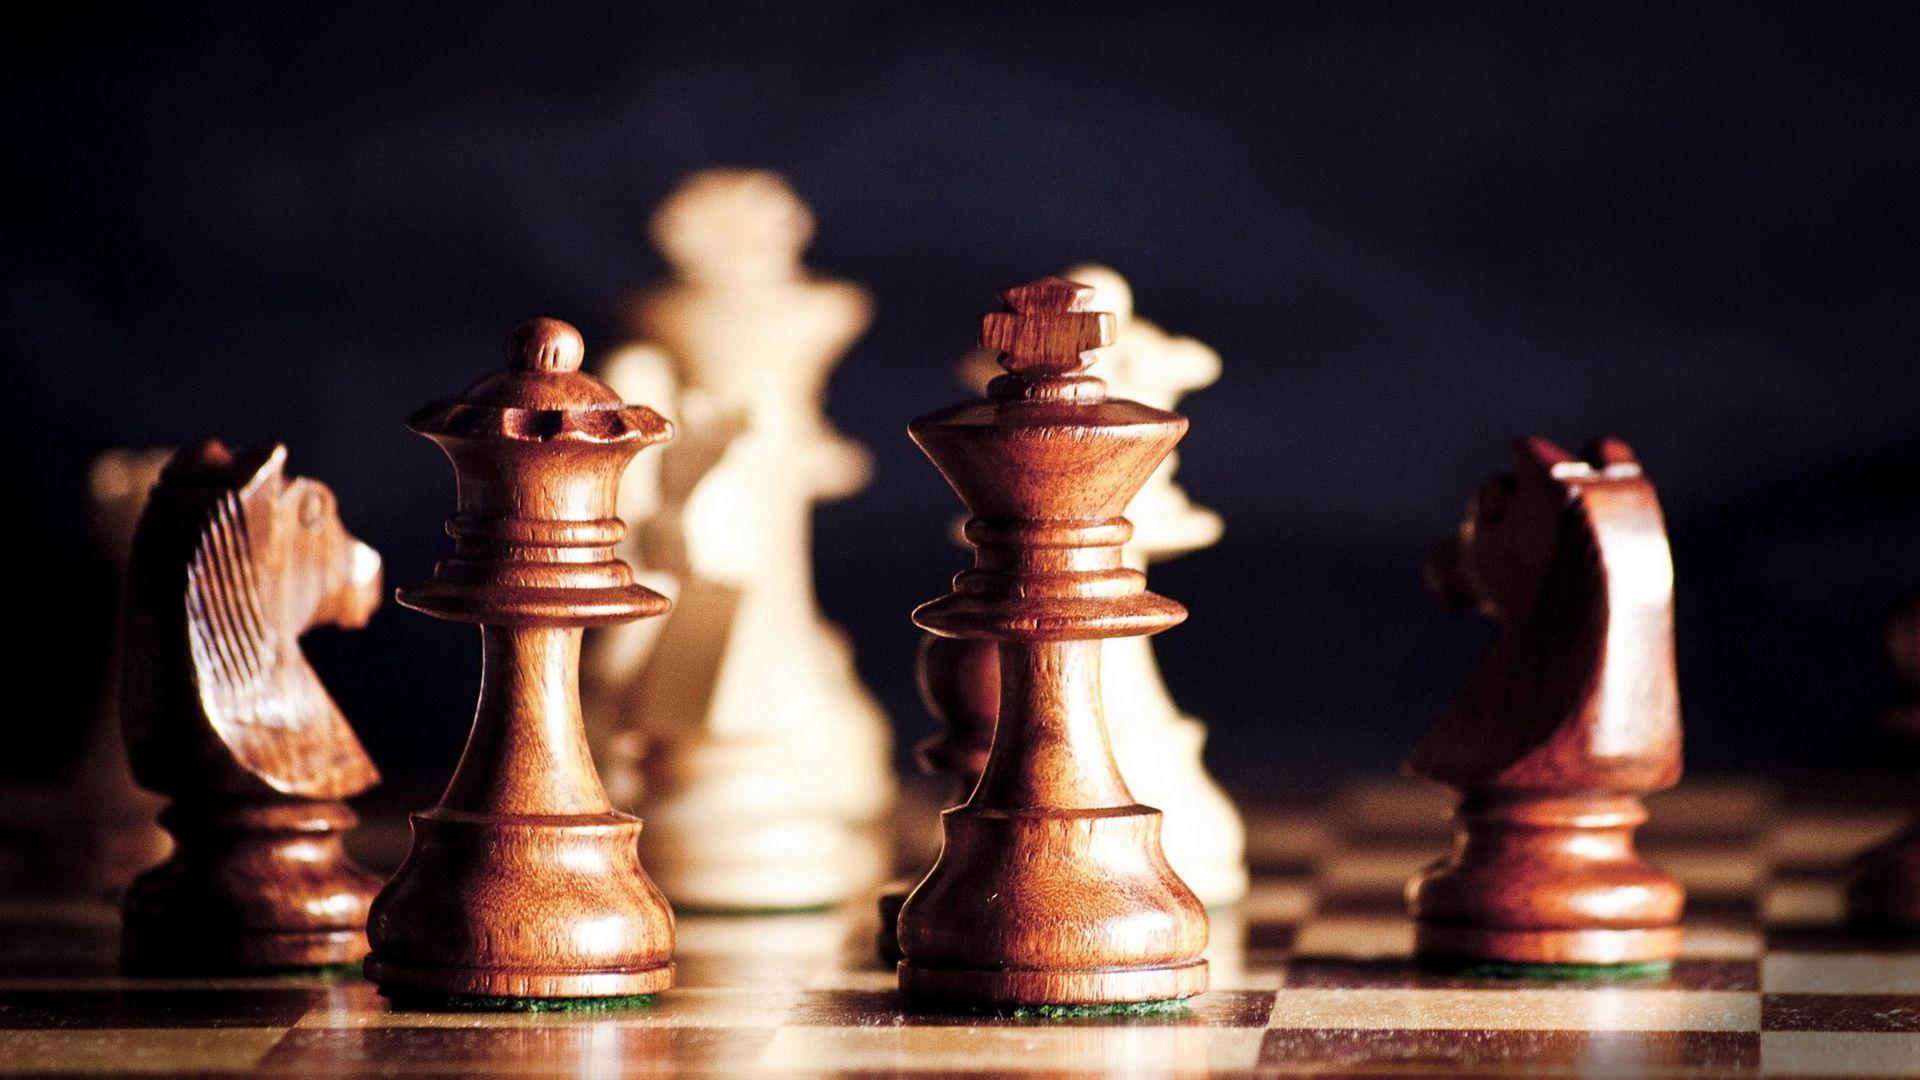 Cool Full HD Wallpaper's Collection: Chess Wallpaper (35) of Chess